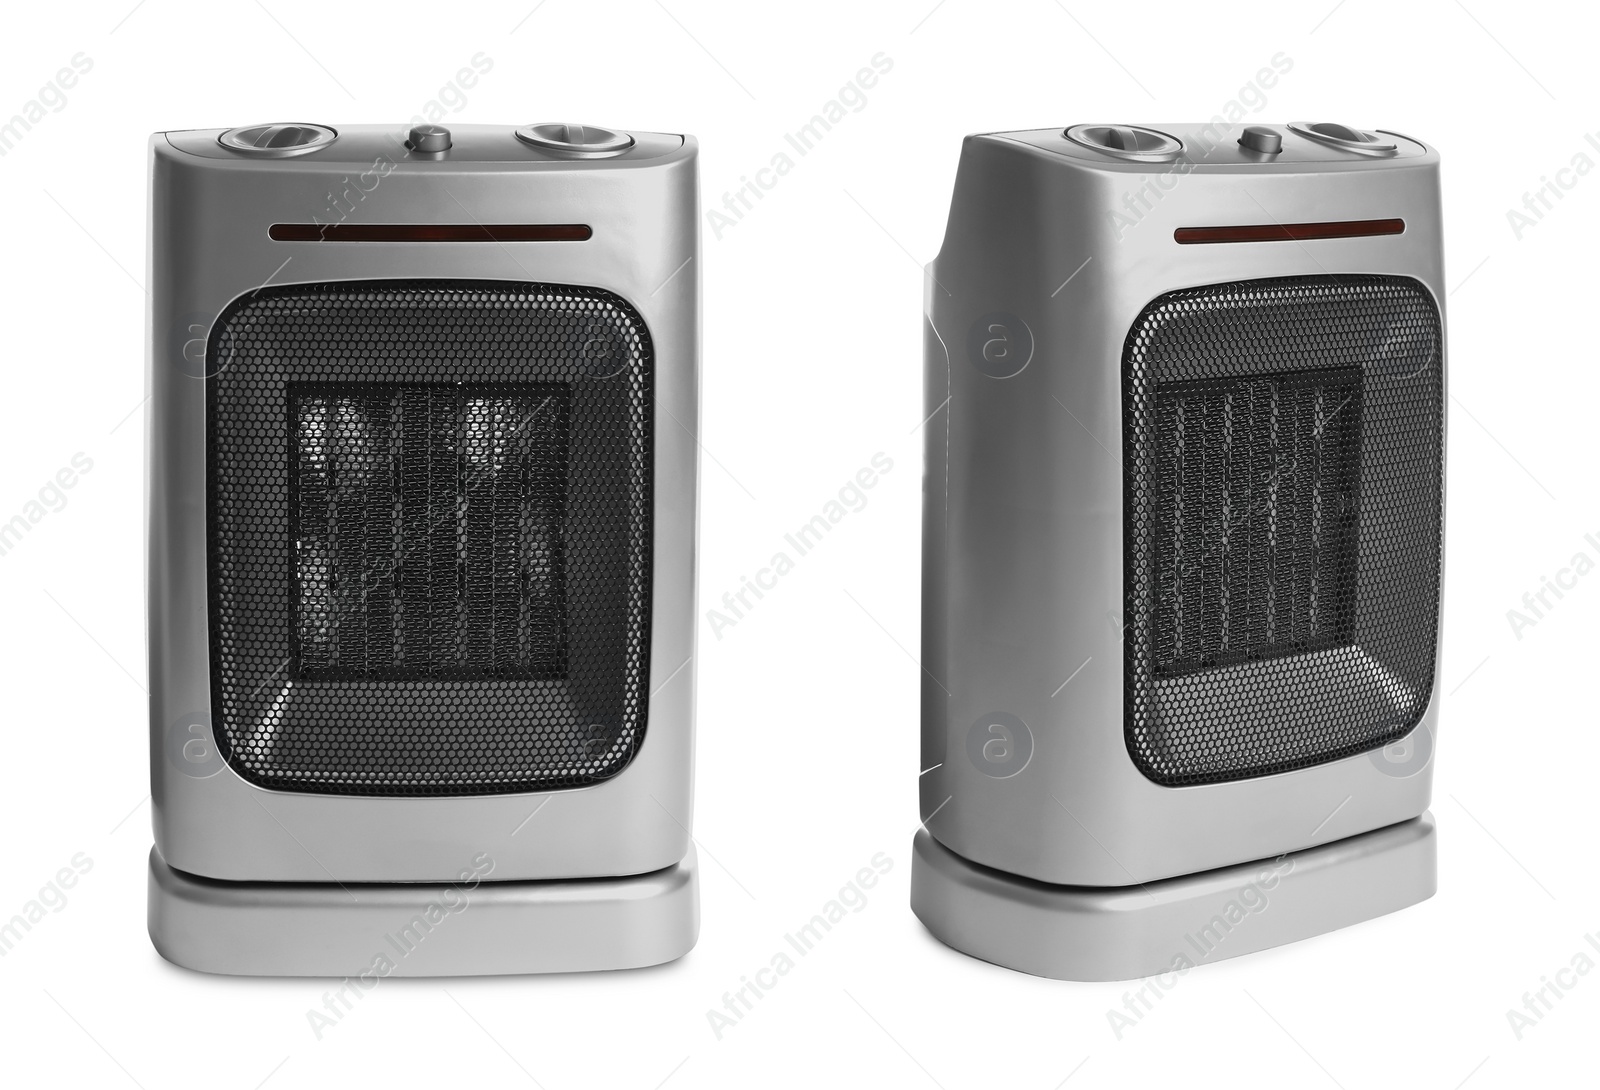 Image of Modern electric fan heaters on white background, collage 